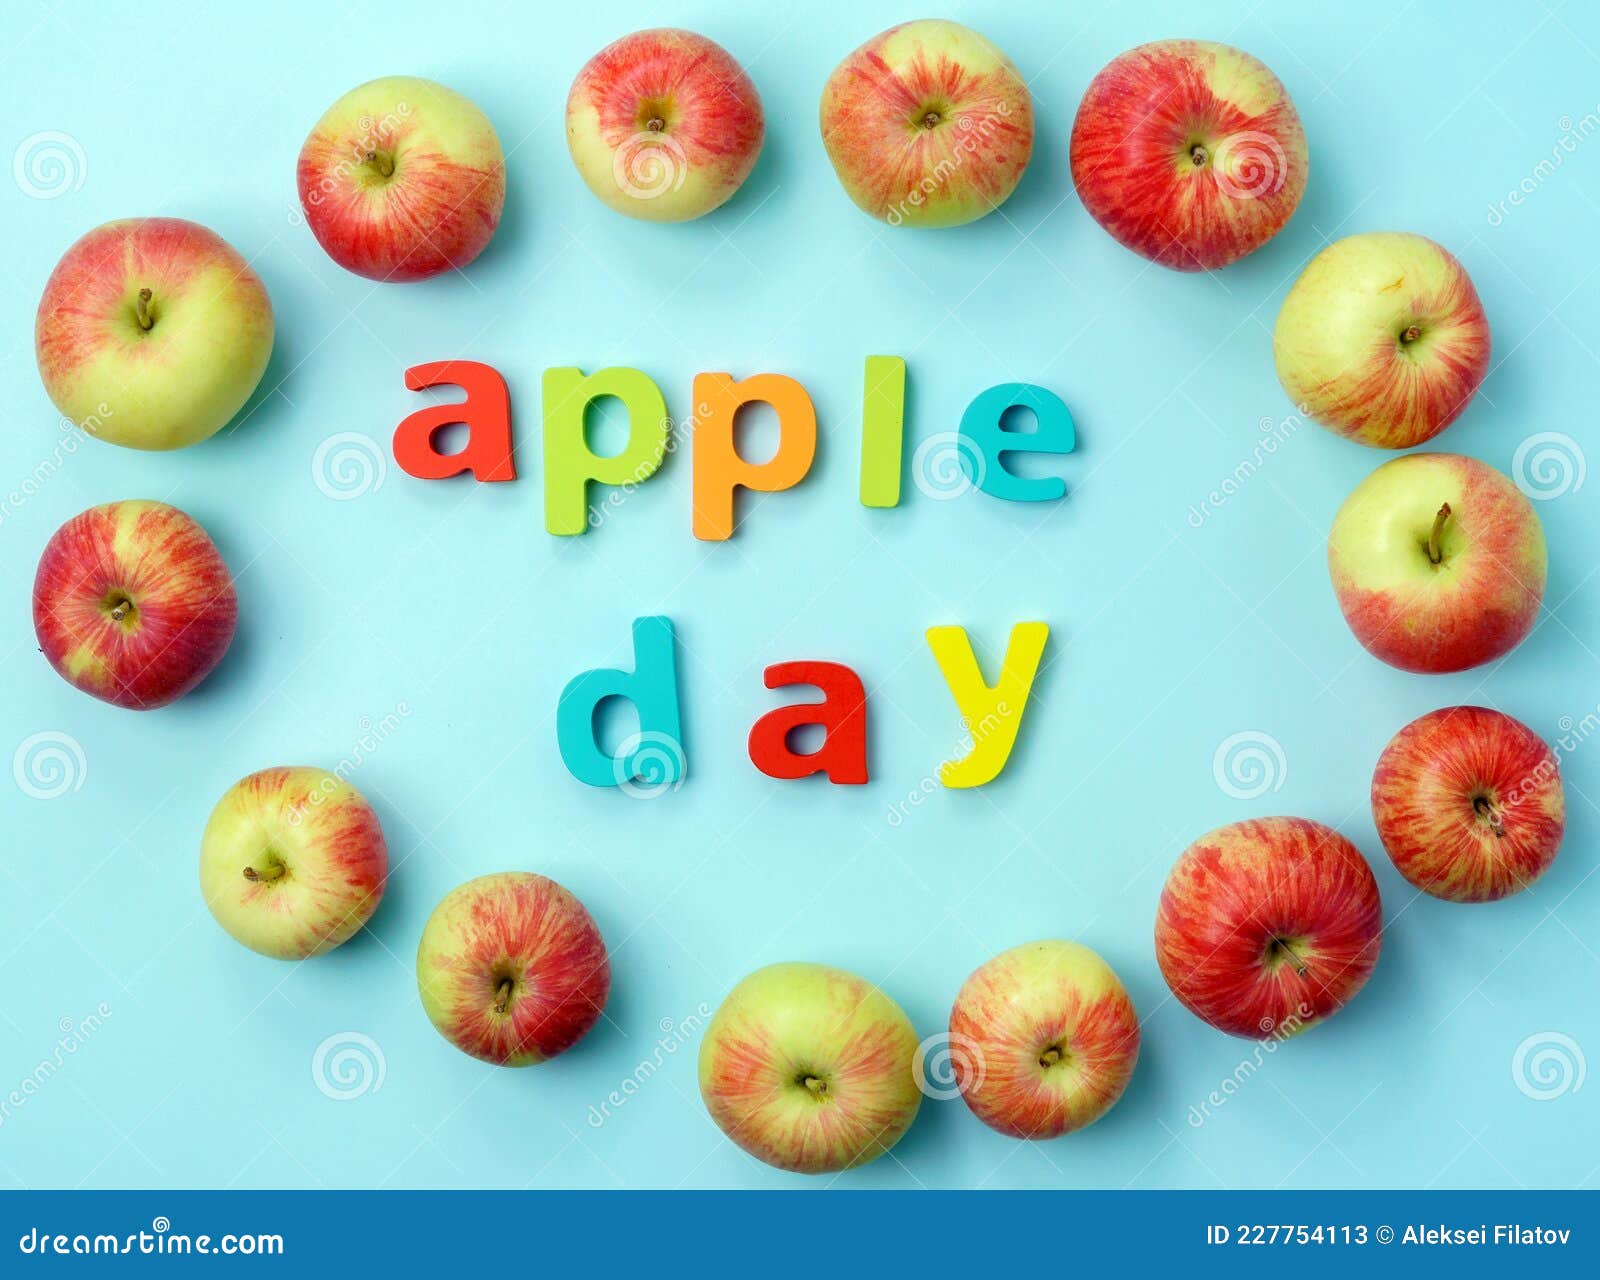 Apple is a National Holiday on October 21. Red Apples on a Blue